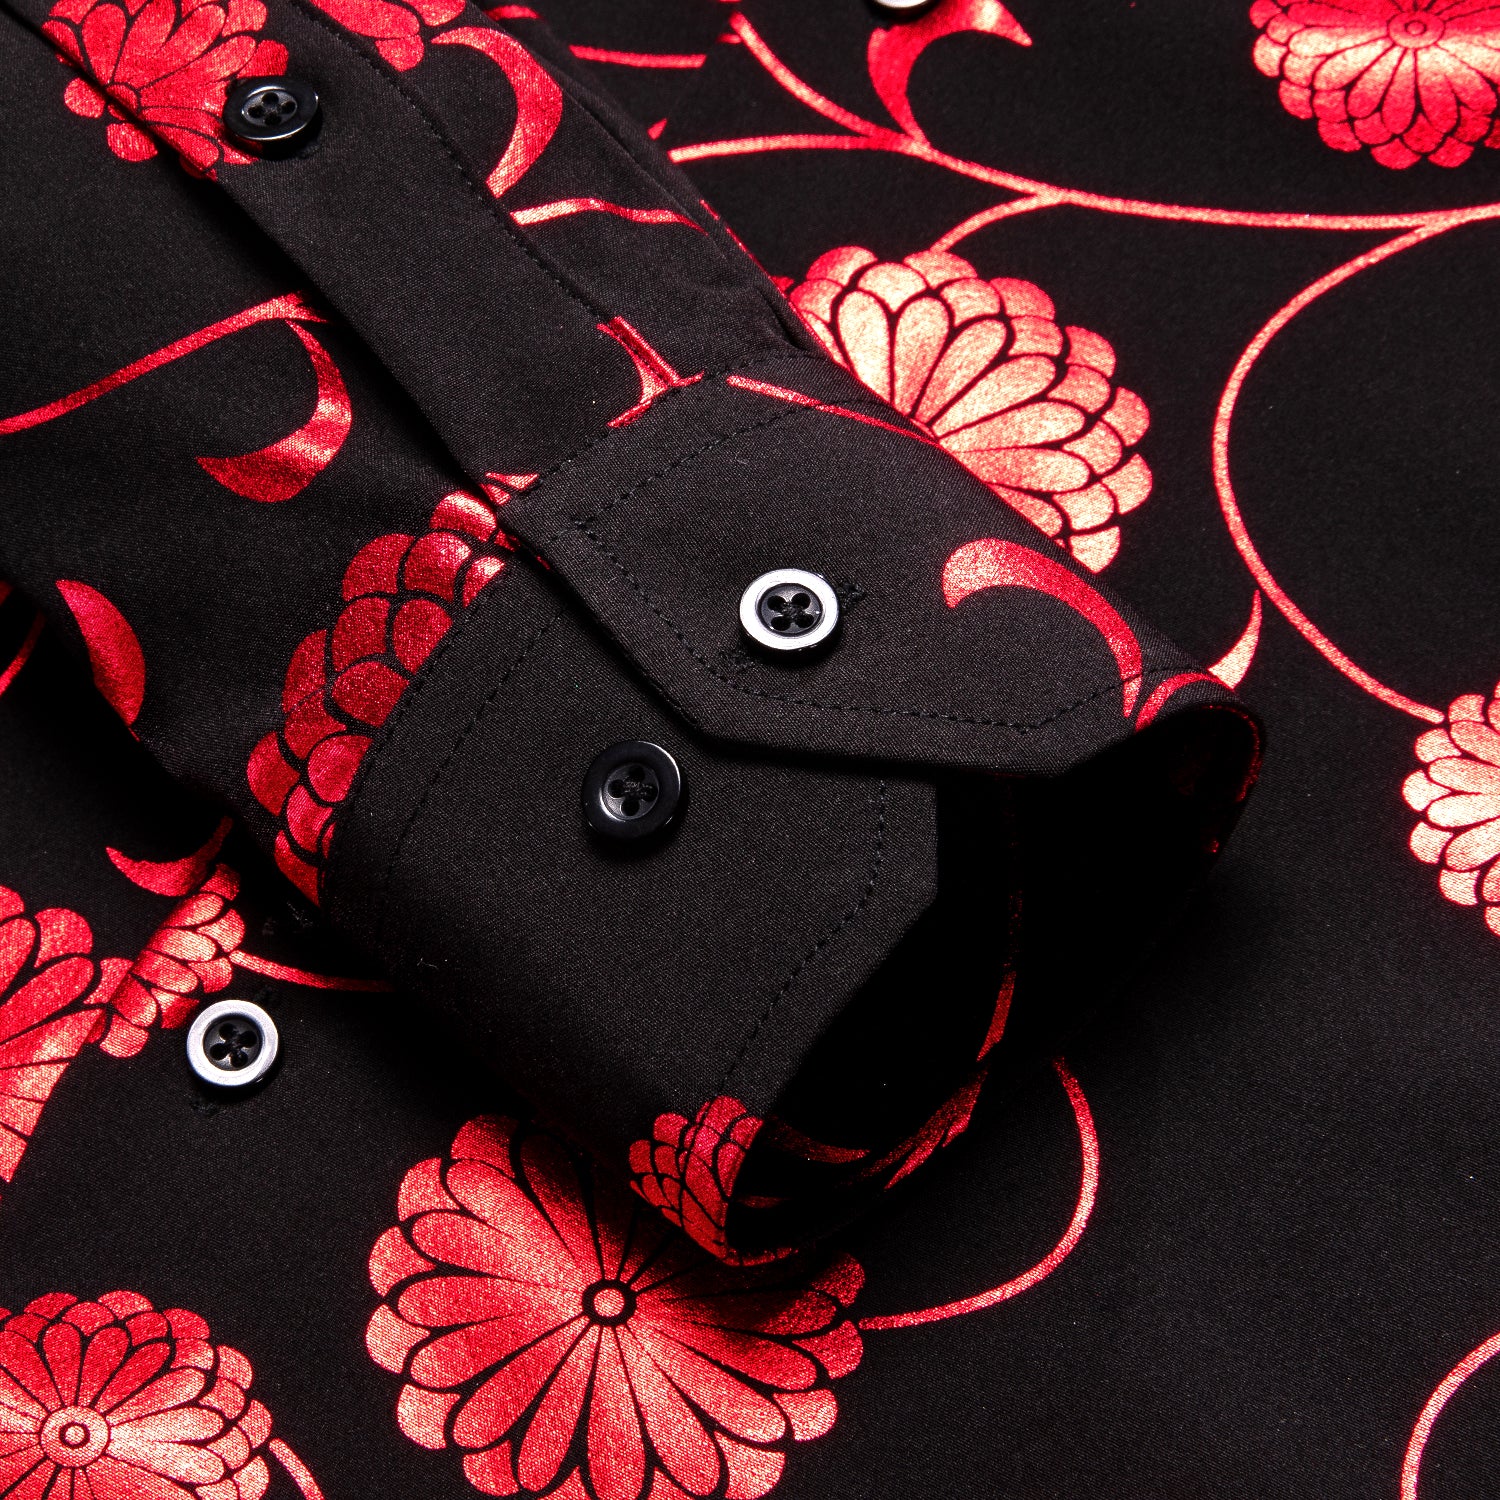 Clearance Sale New Black Red Flower Men's Shirt